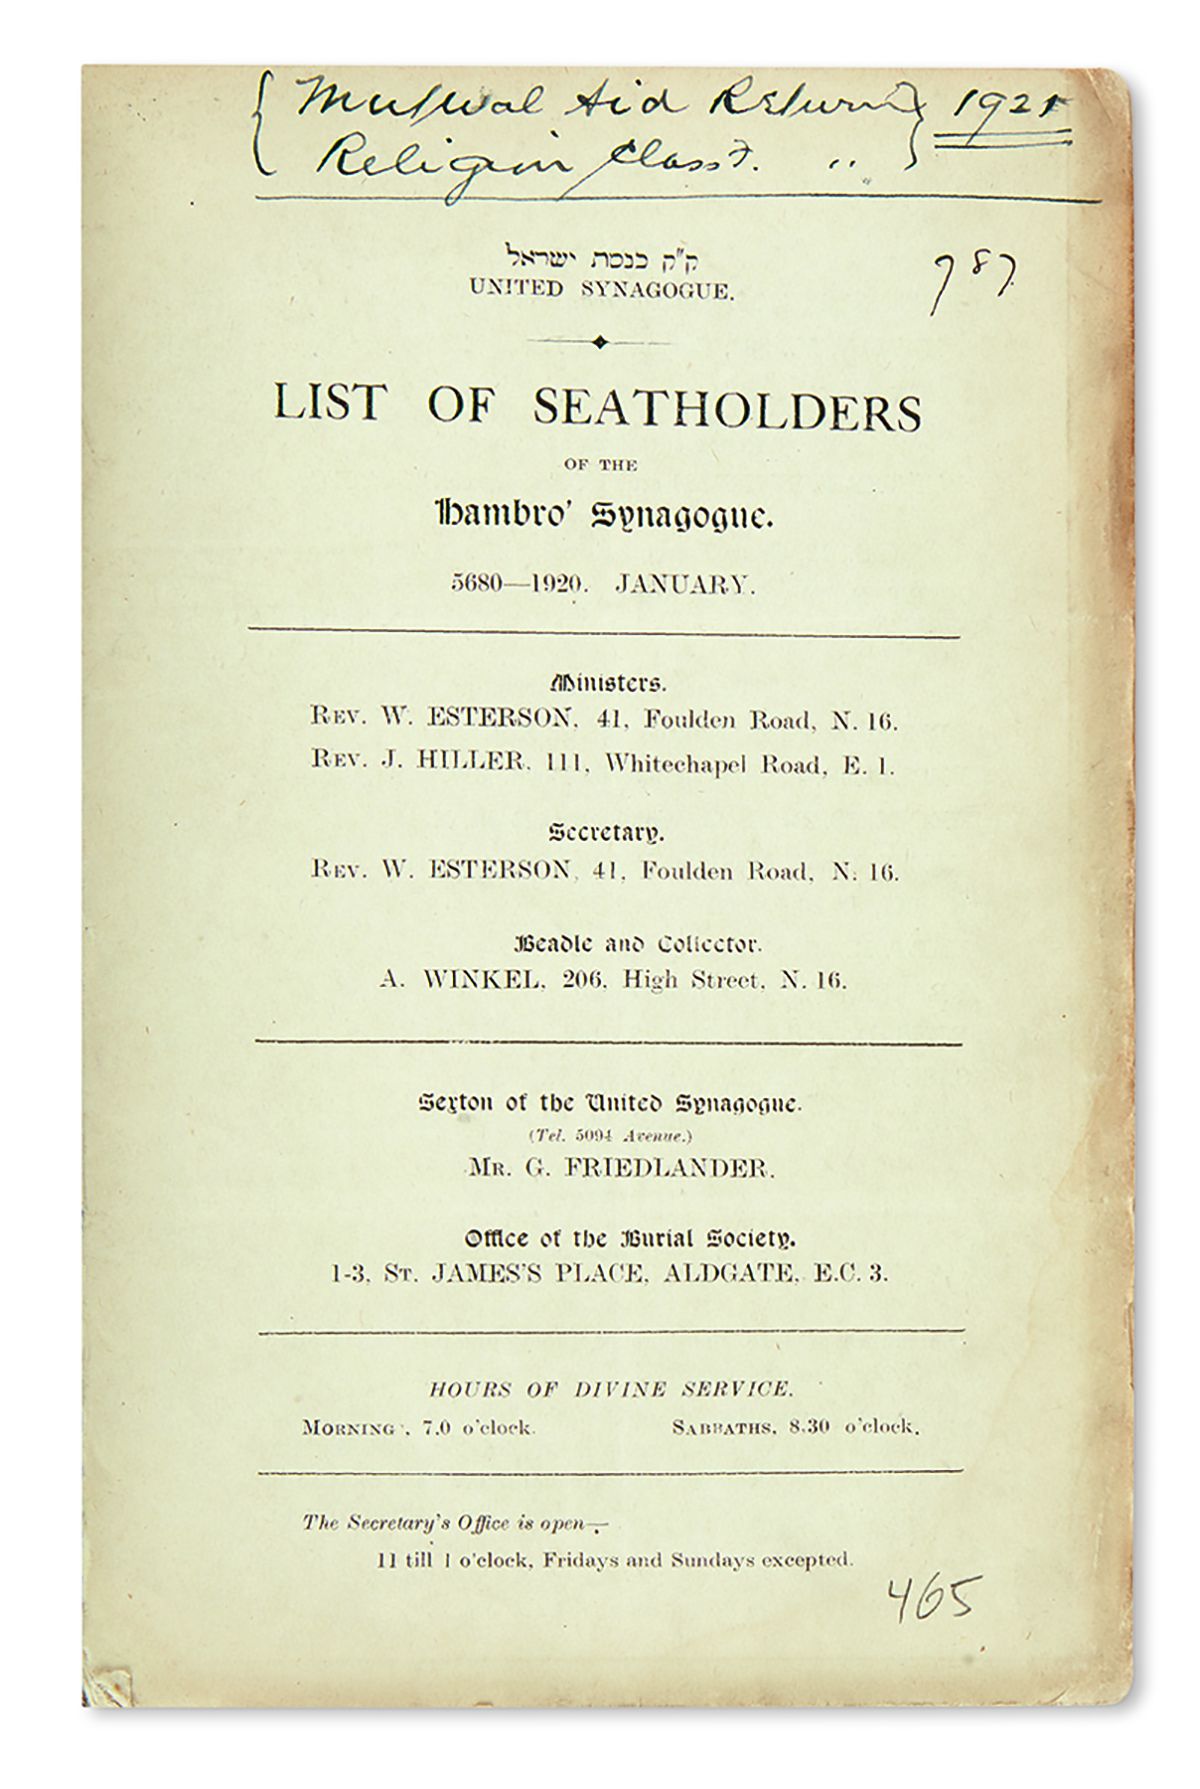 United Synagogue. List of Seat-holders of the Great Synagogue.